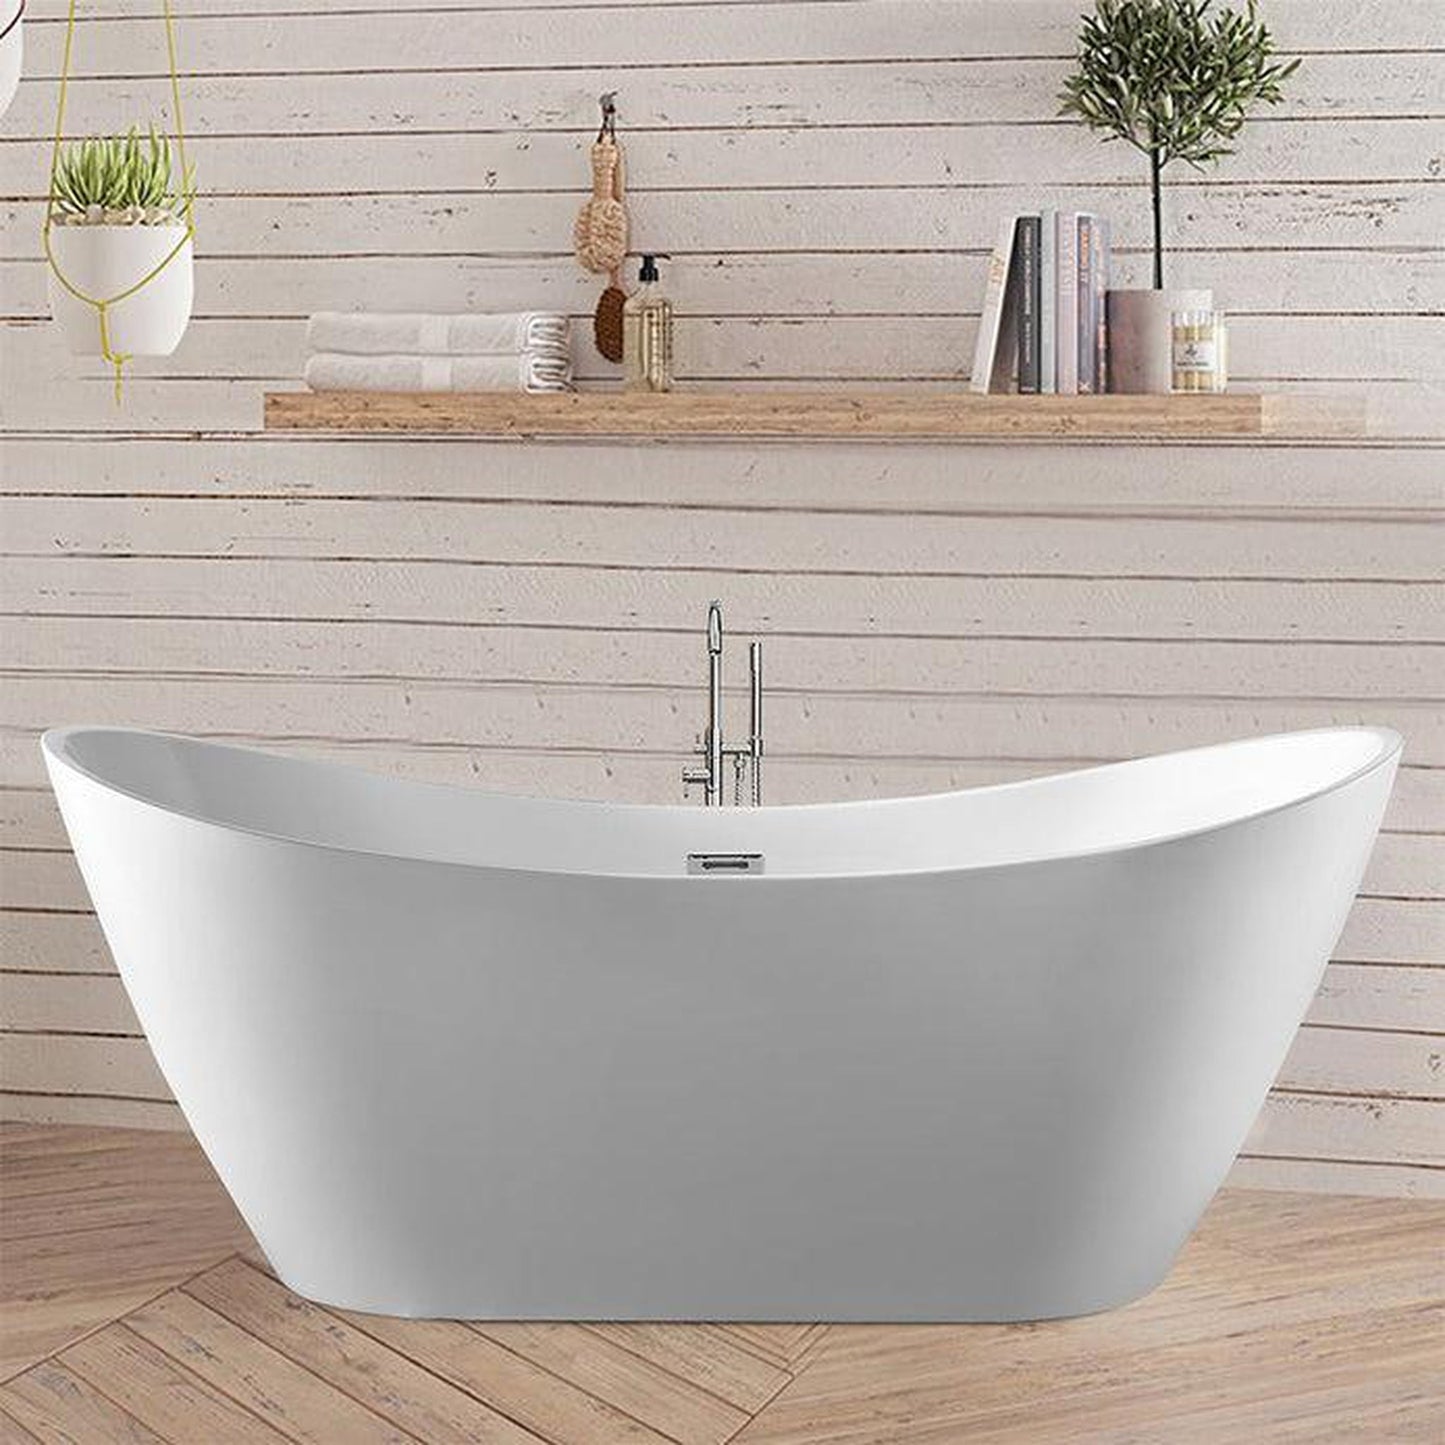 Vanity Art 71" W x 28" H White Acrylic Modern Stand Alone Soaking Tub With Polished Chrome Slotted Overflow and Pop-up Drain